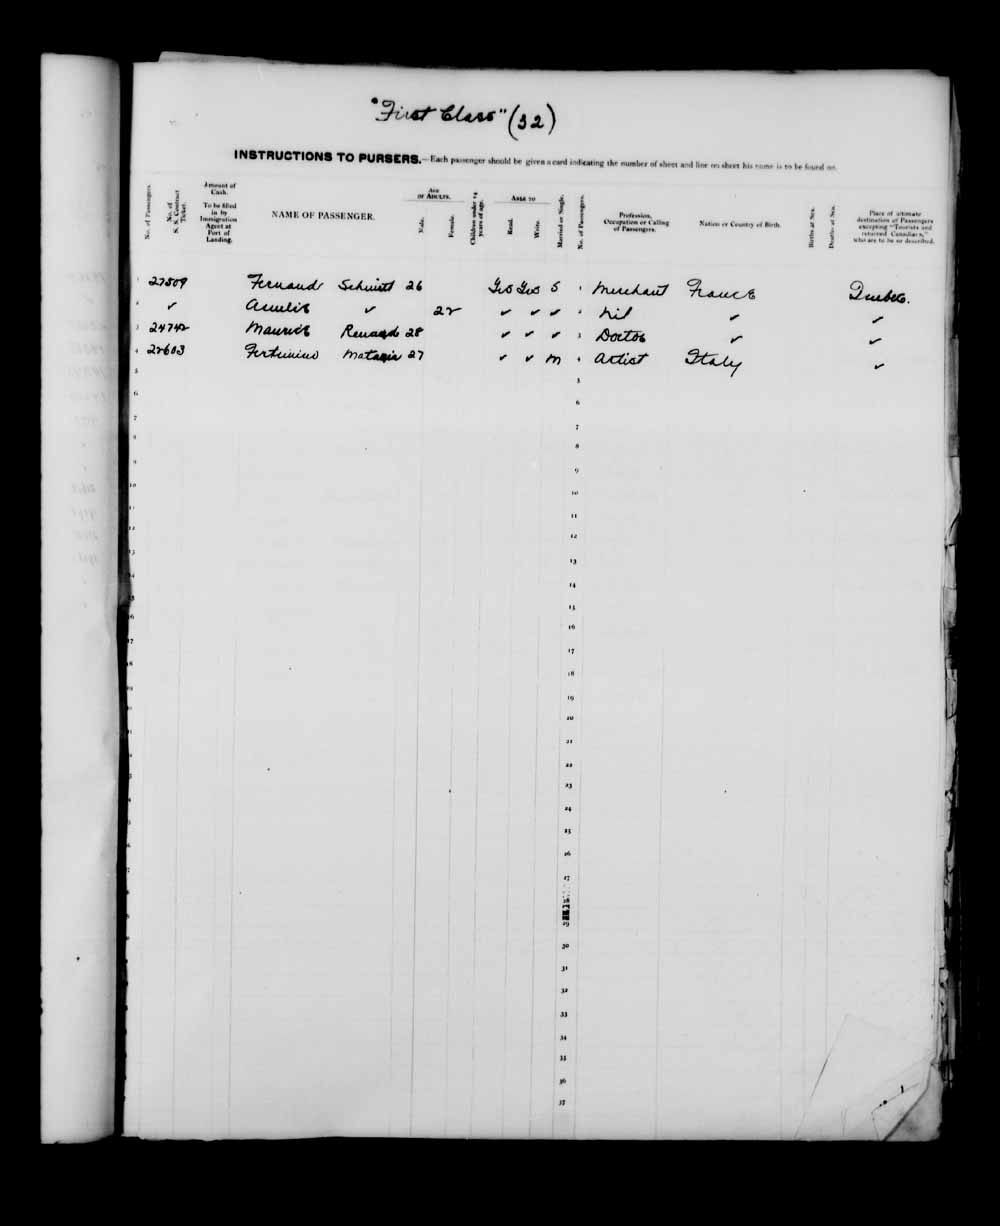 Digitized page of Quebec Passenger Lists for Image No.: e003591283